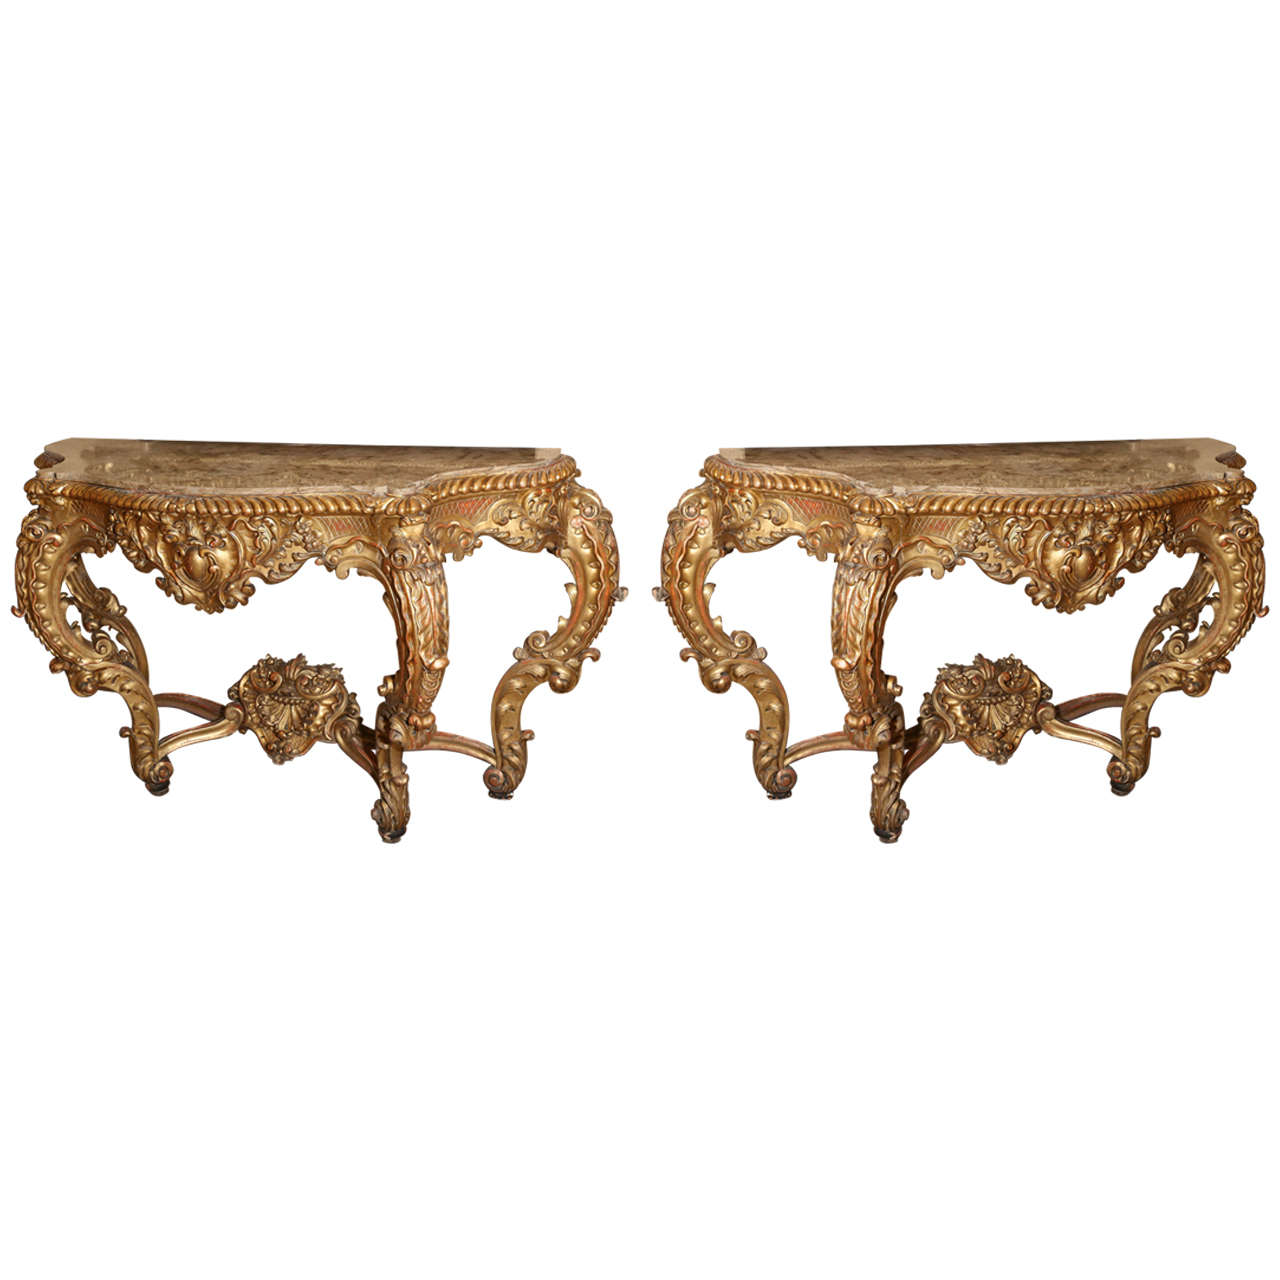 Pair of Italian carved Giltwood 18th Century Consoles